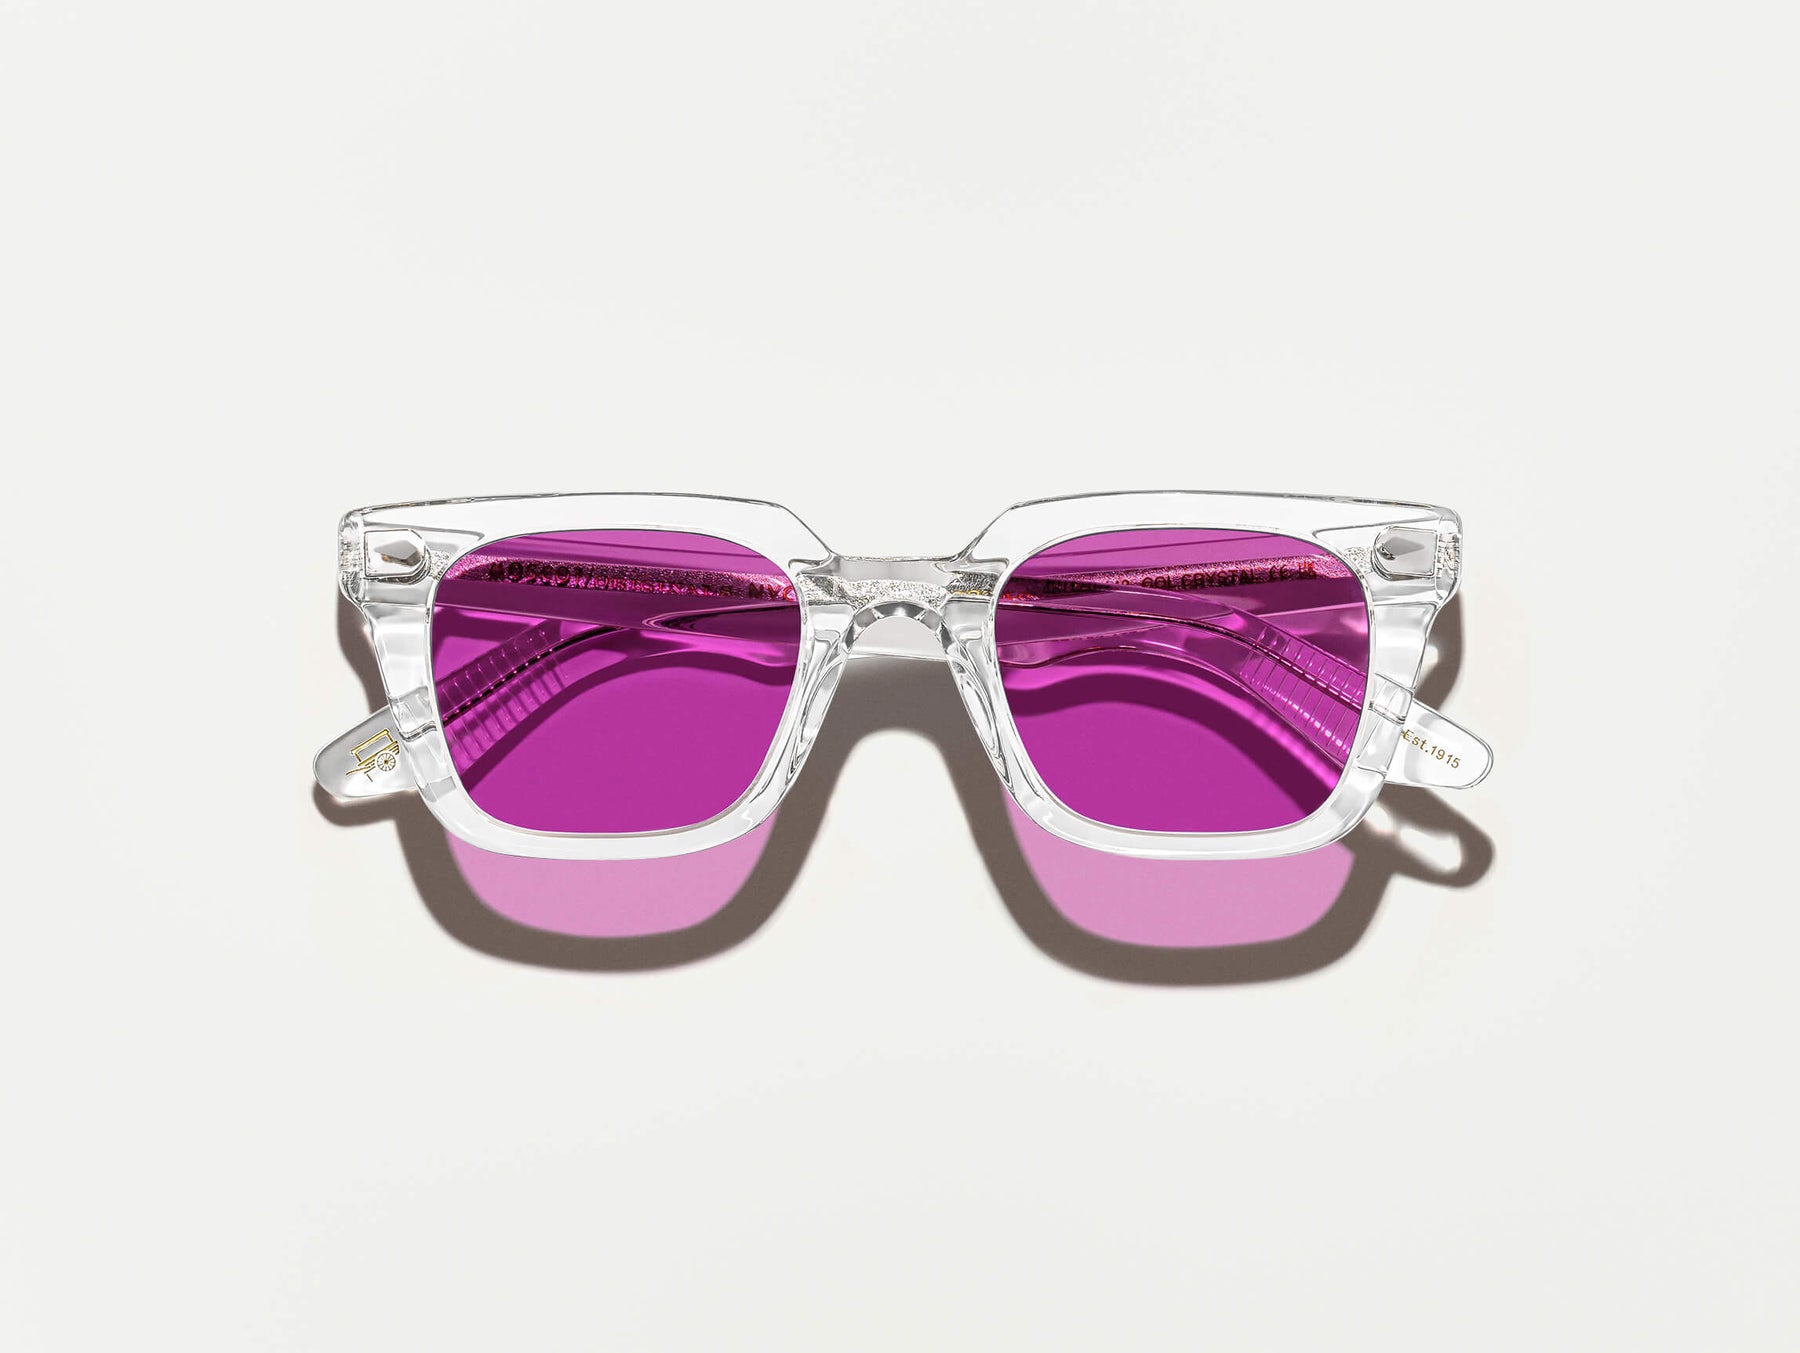 The GROBER Crystal with Purple Nurple Tinted Lenses